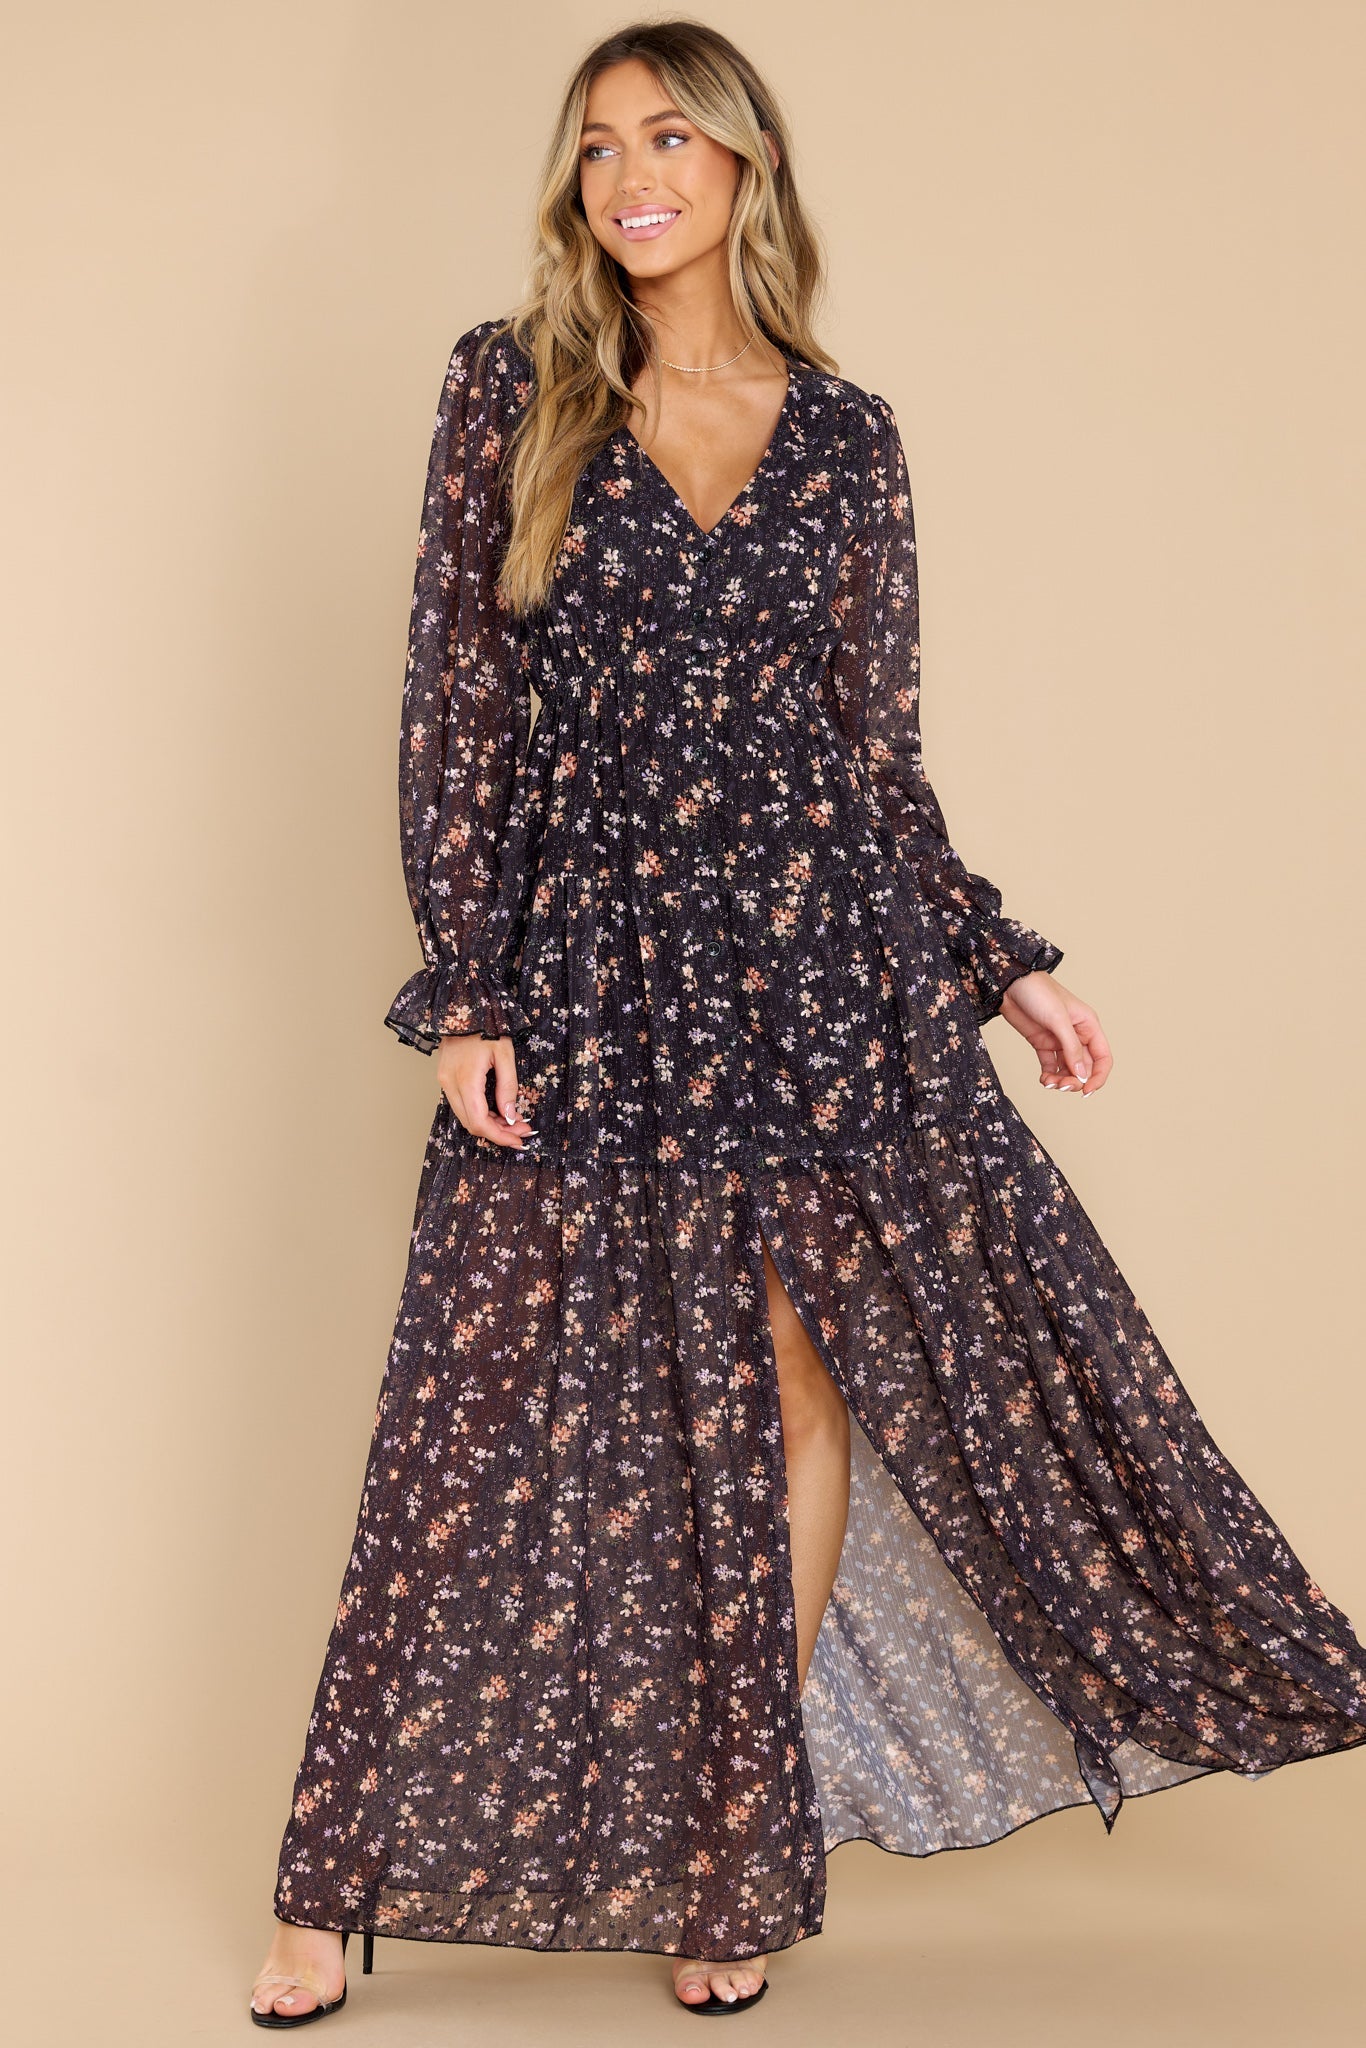 Share Your Story Black Floral Print Maxi Dress - Red Dress